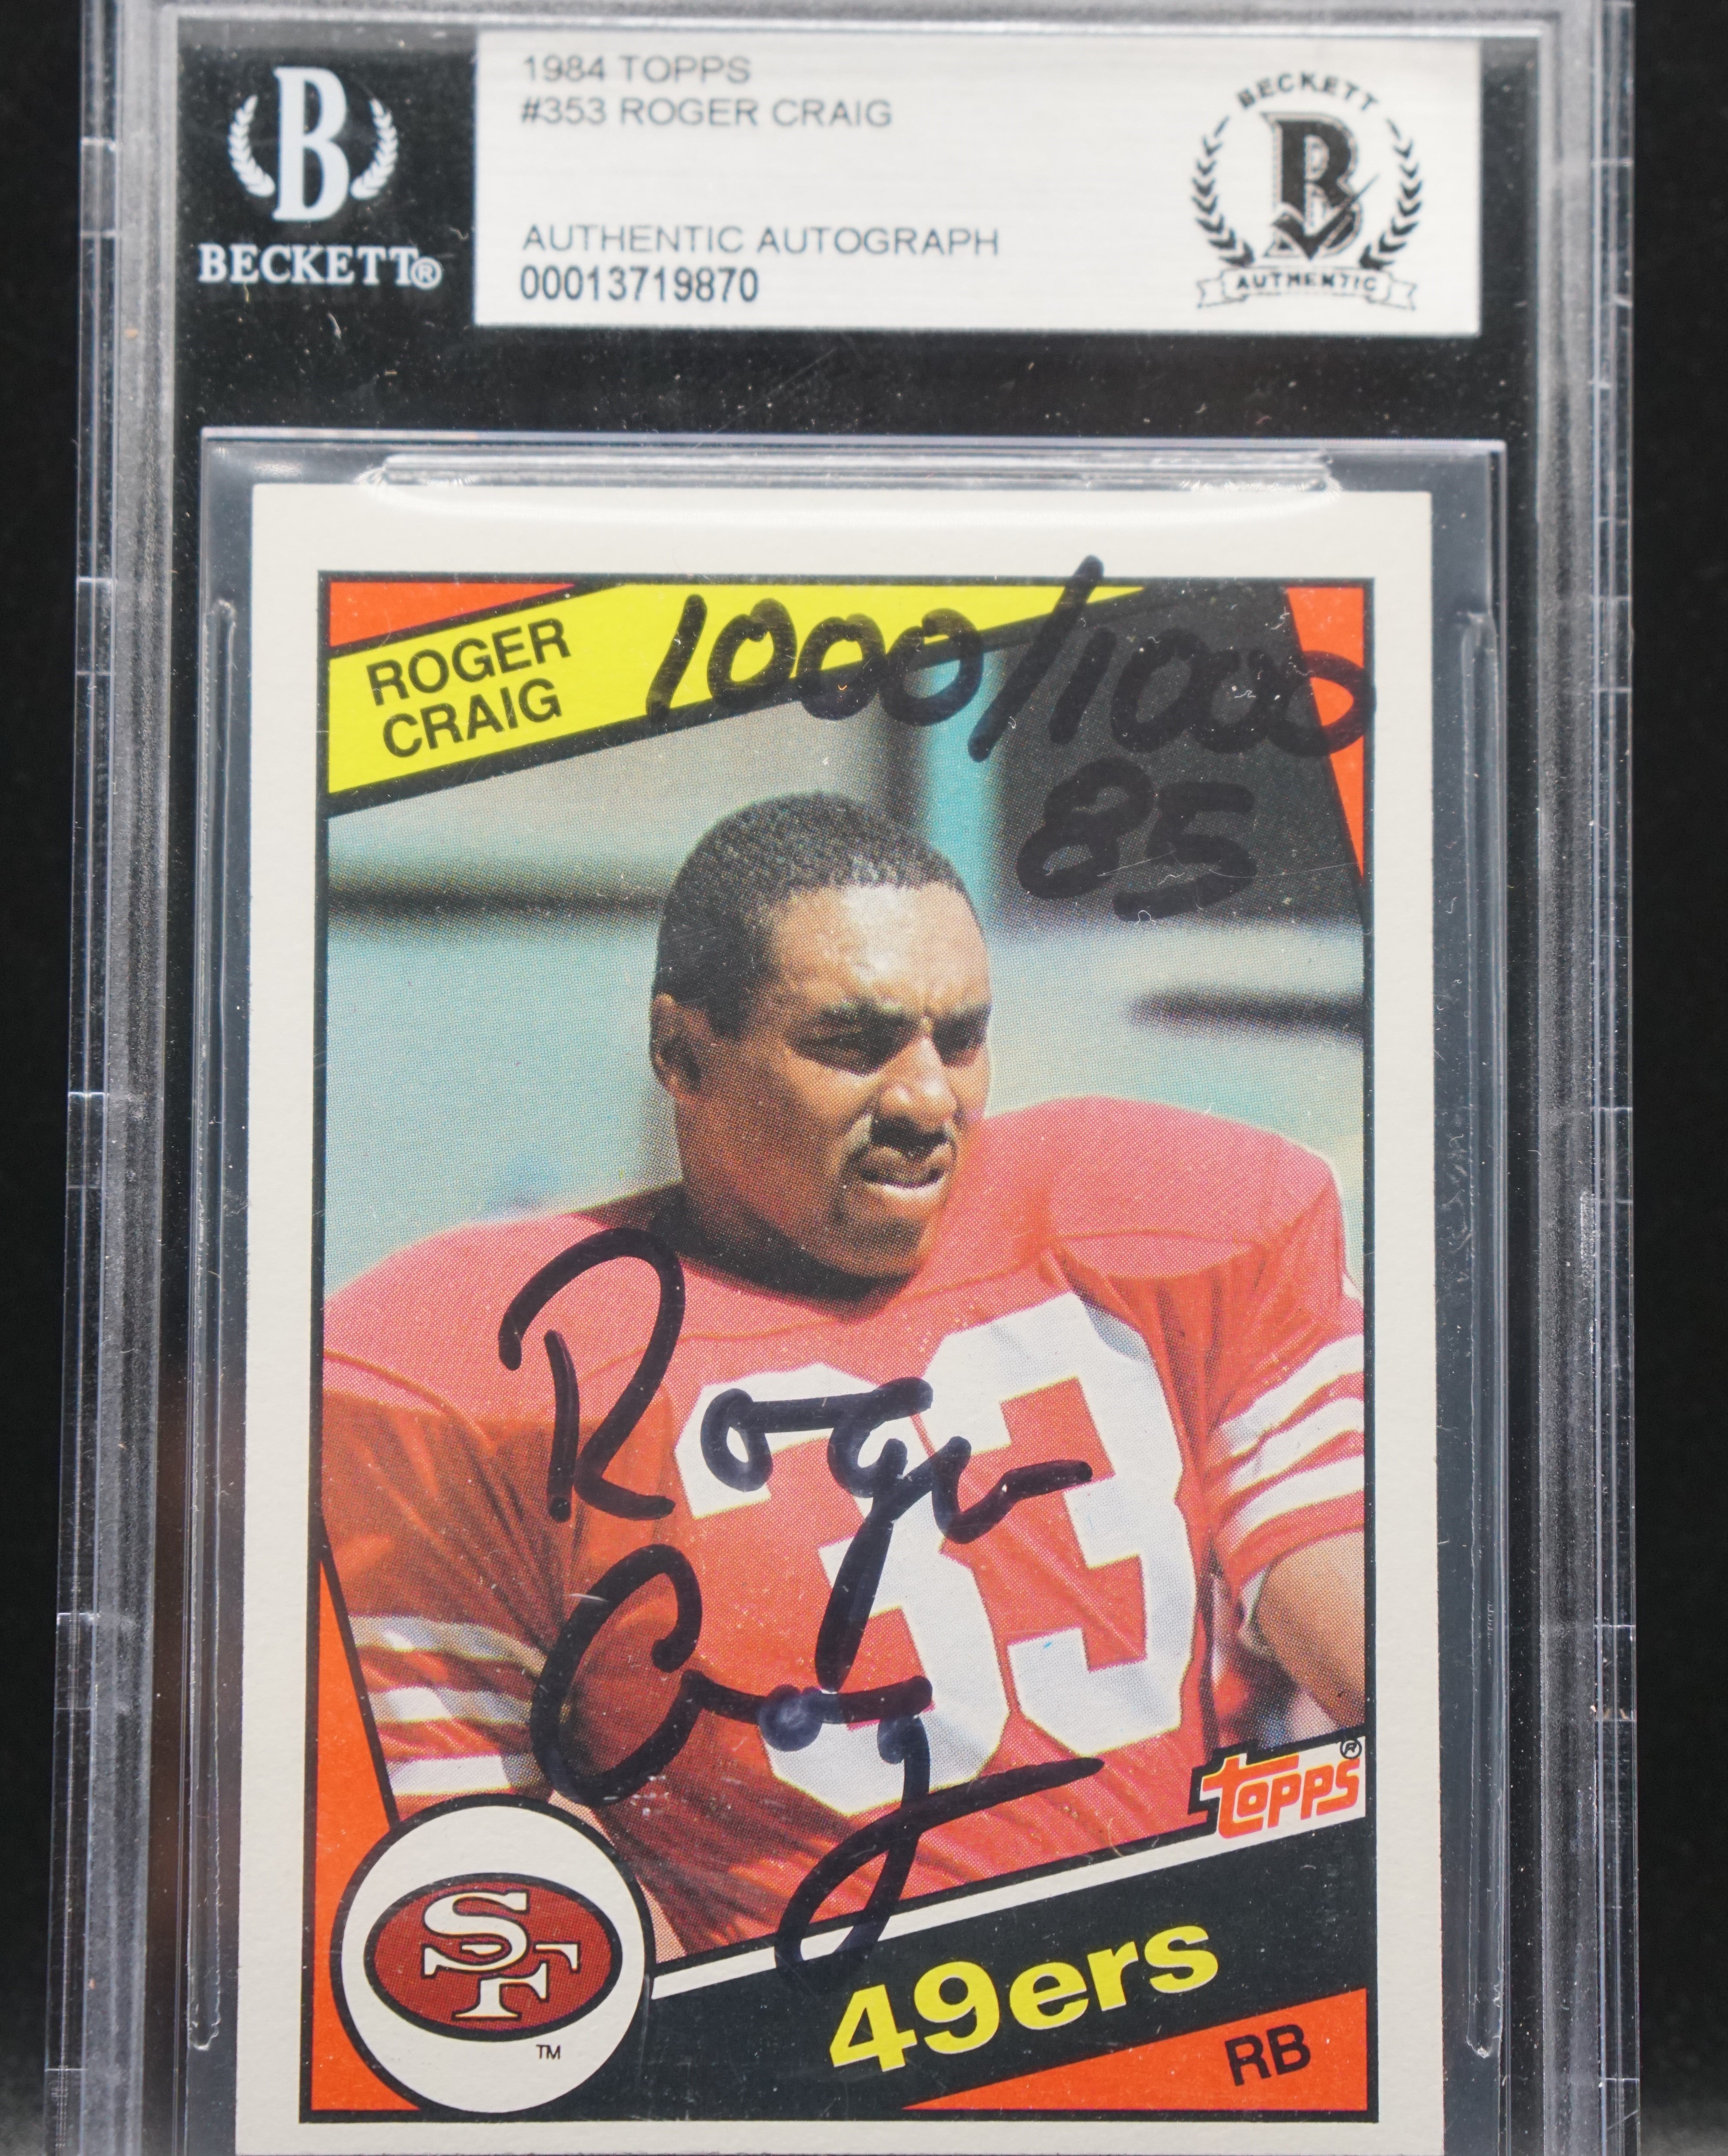 Roger Craig Rookie Card - San Francisco 49ers - Tops Trading Card - Signed in Black Sharpie with "1000/1000 85" Inscription - Slabbed with Beckett COA